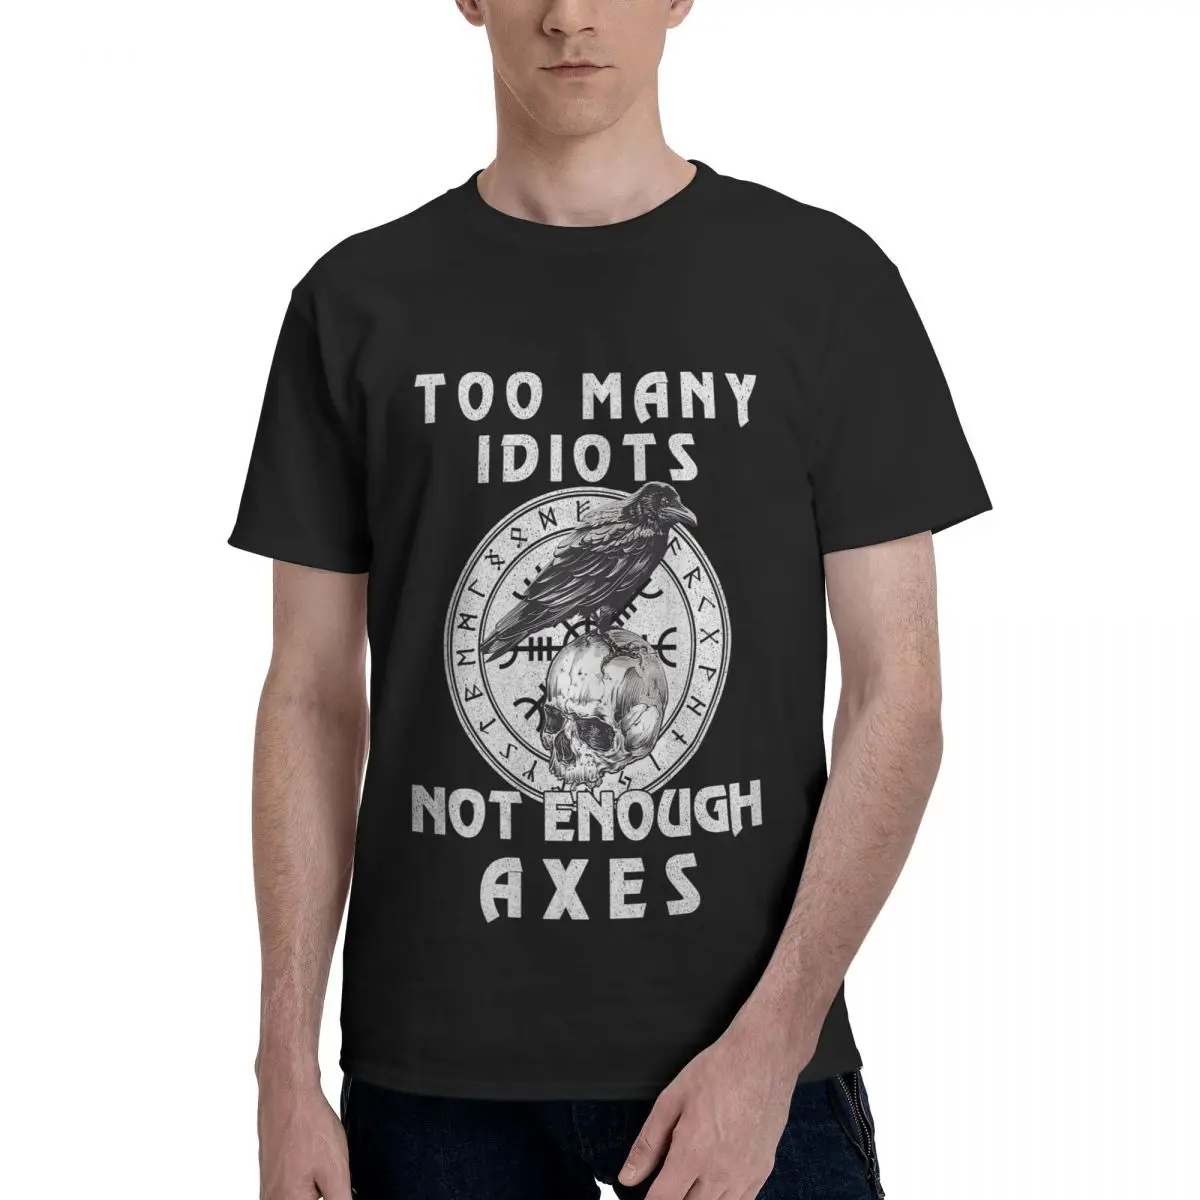 

Too Many Idiots Not Enough Axes Viking Norse Men's Fun Tees Short Sleeve Round Collar 100% Cotton 2021 New Arrival T-Shirt